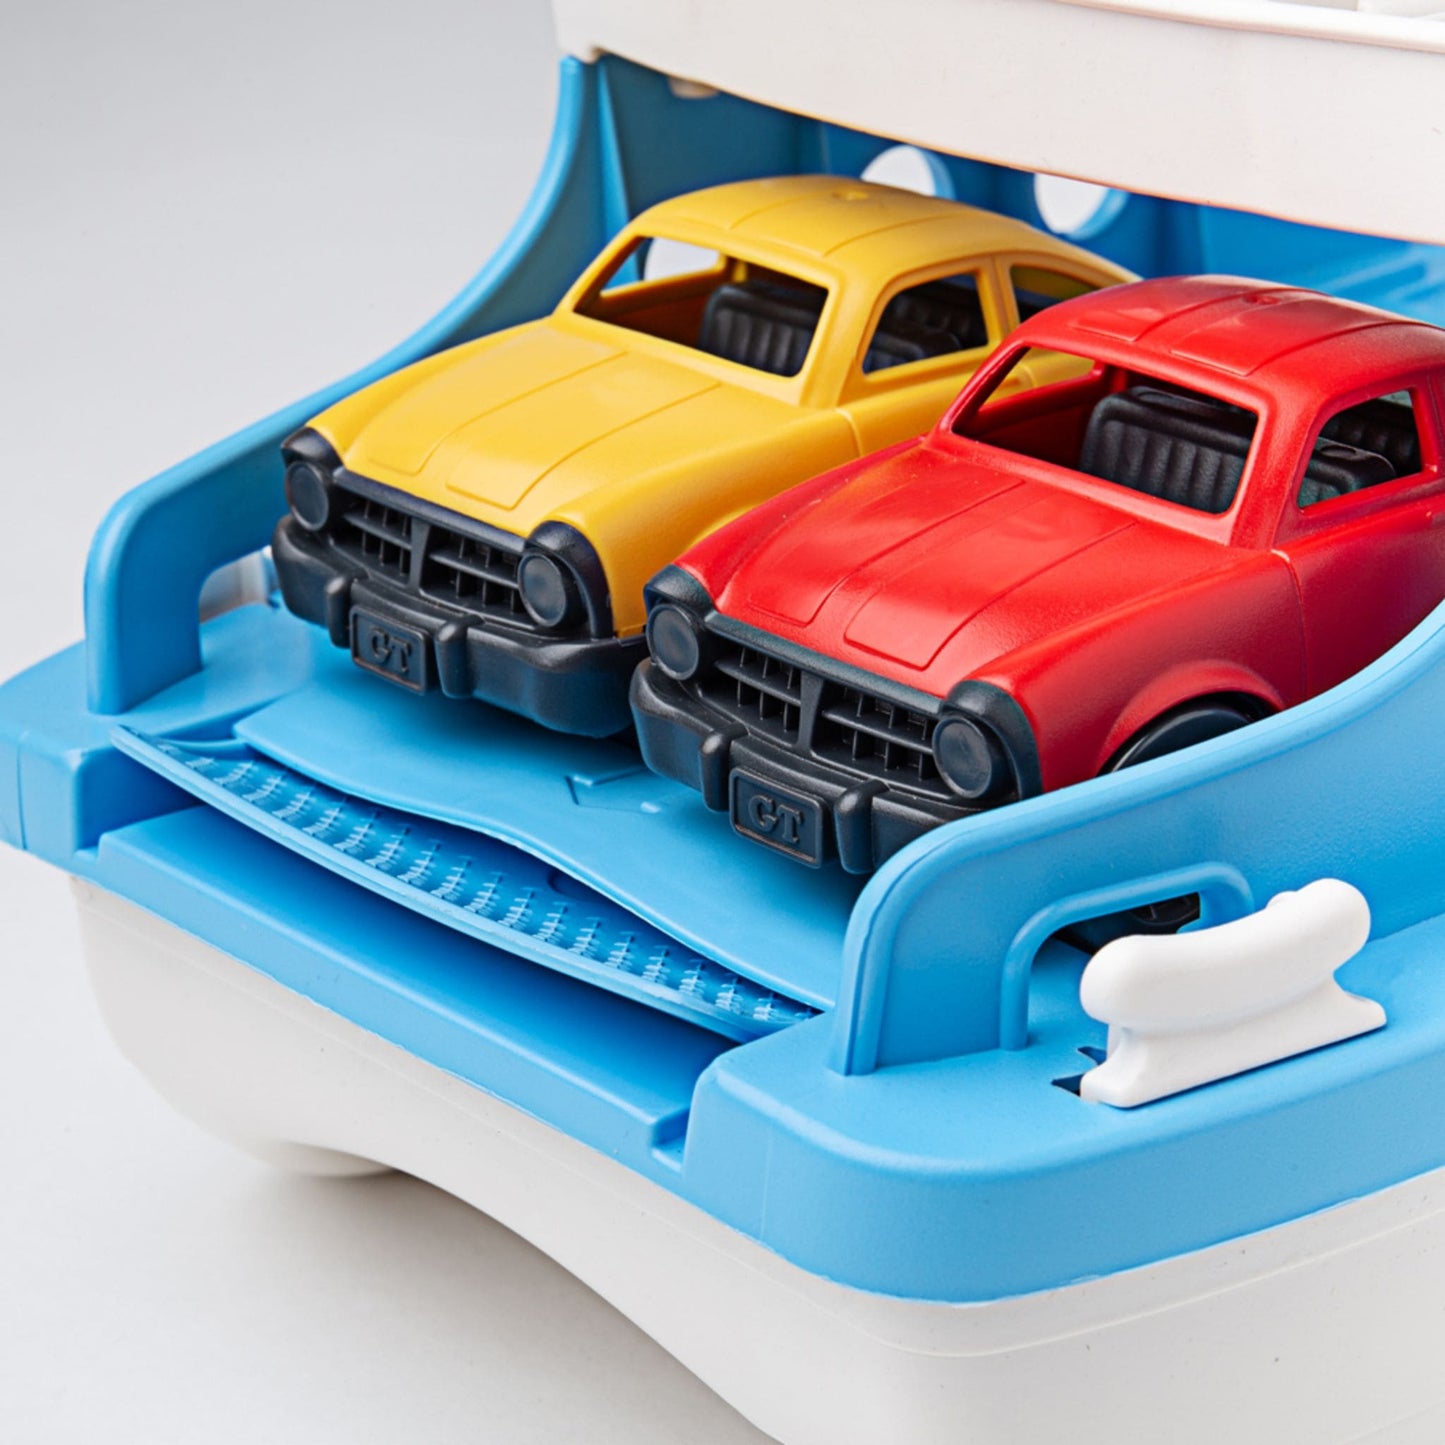 Green Toys Ferry Boat and Cars - eco toys made from recycled plastic